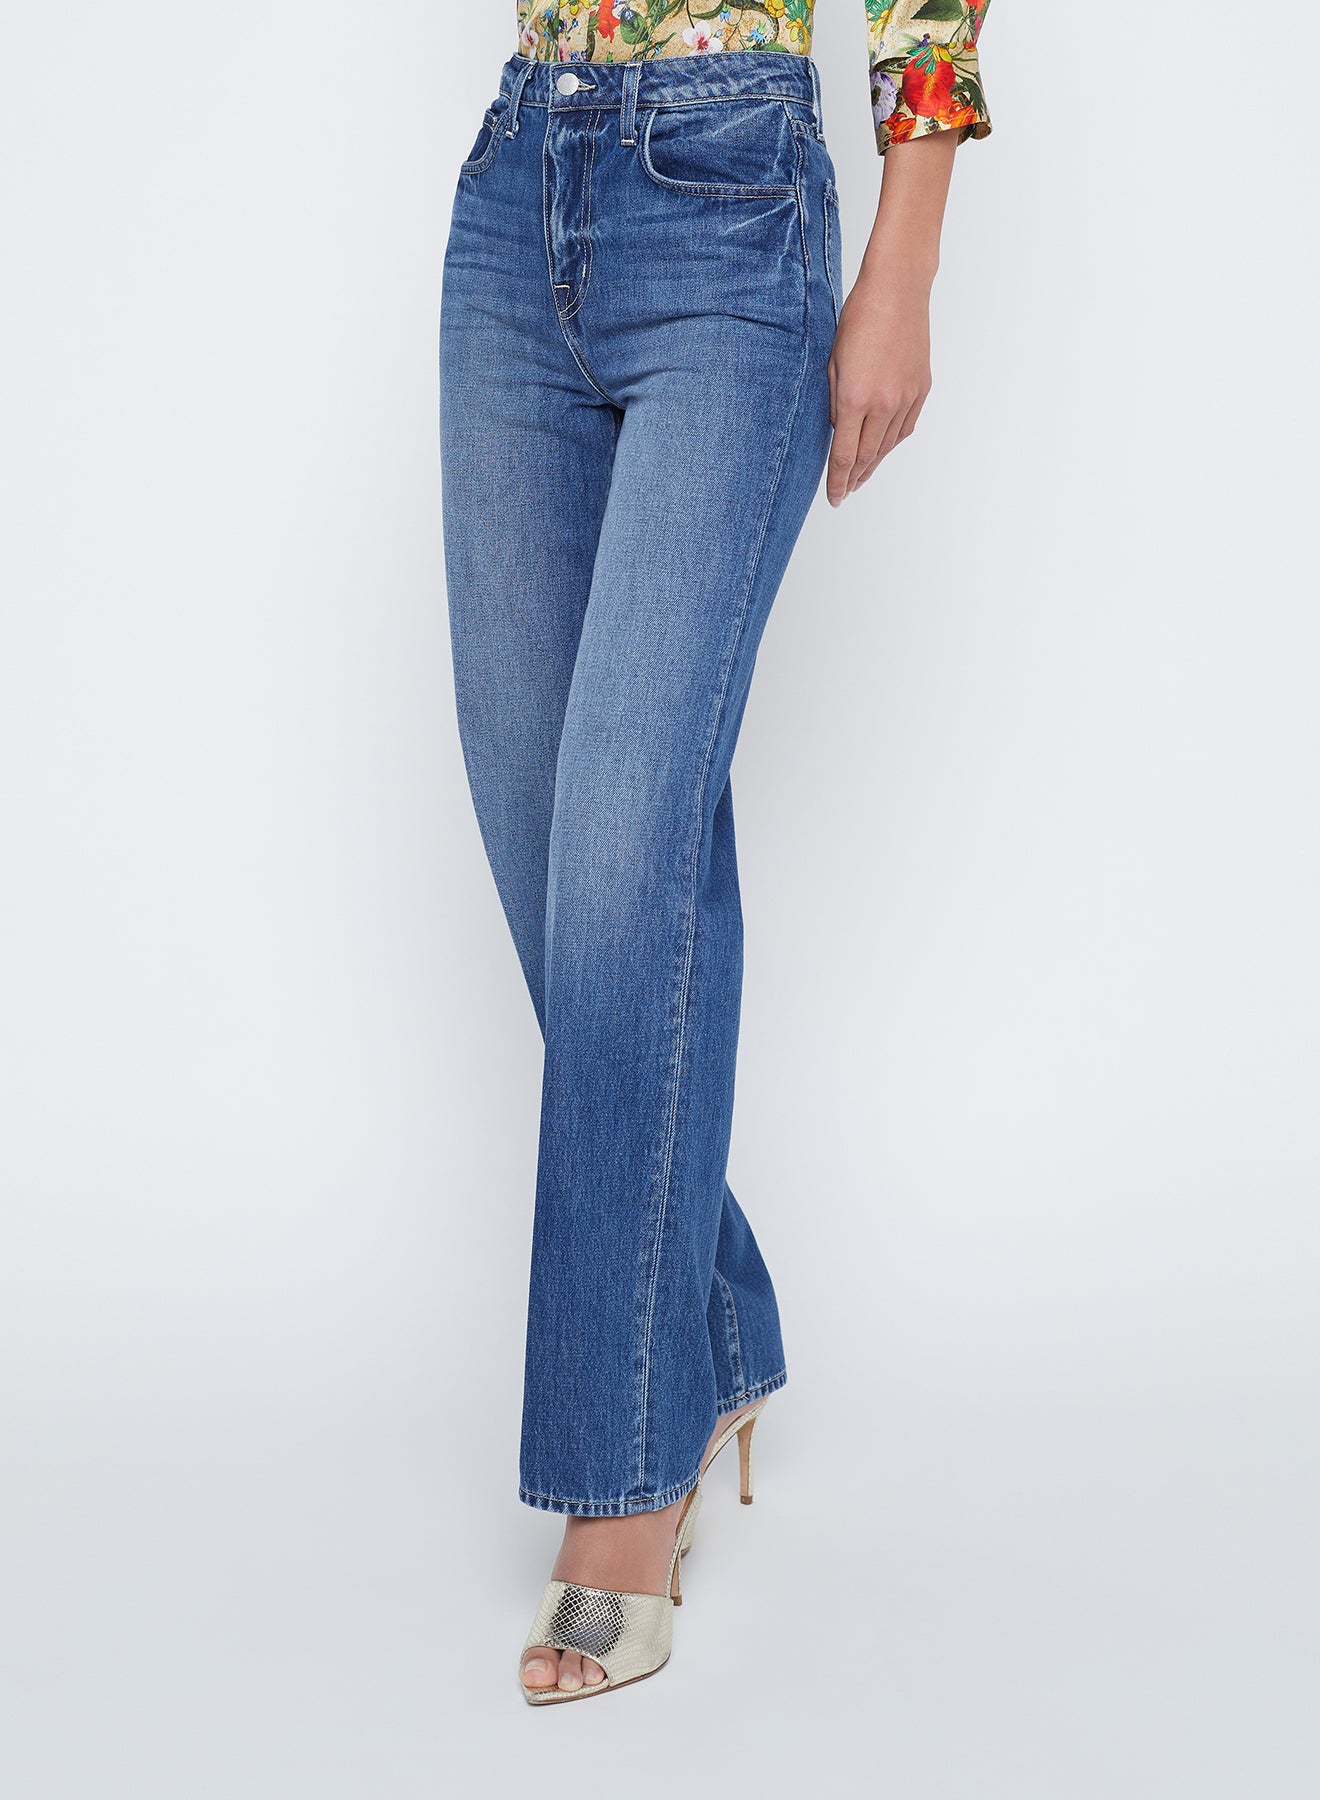 L'Agence Jones Ultra High Rise Stovepipe Jean in Brentwood